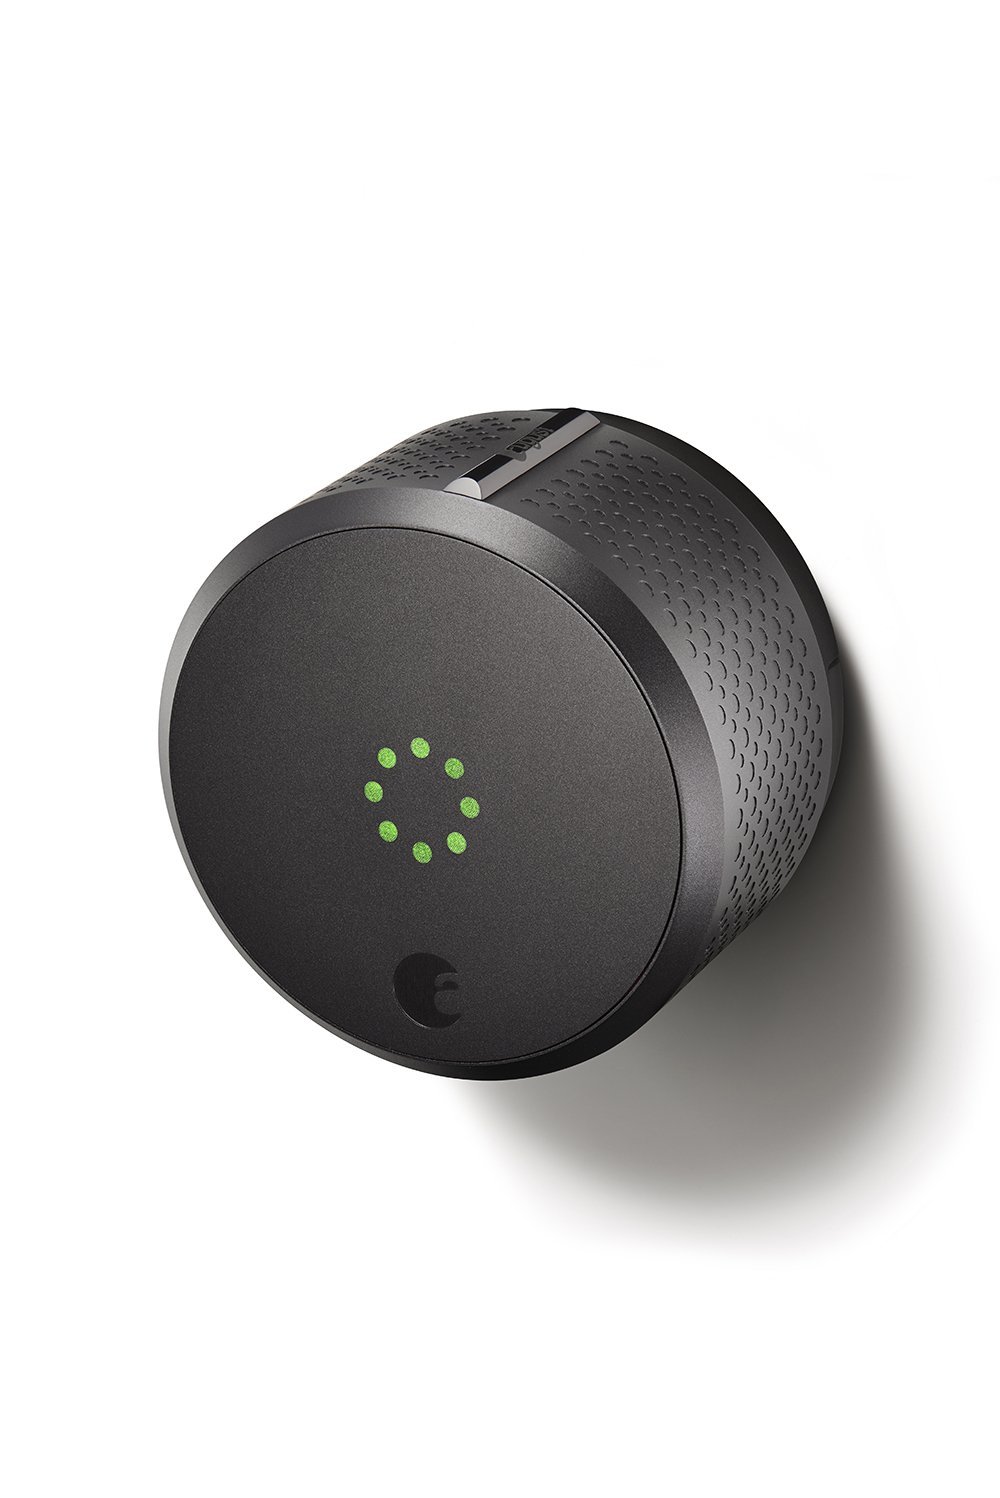 August Smart Lock 2nd gen for $120, free shipping